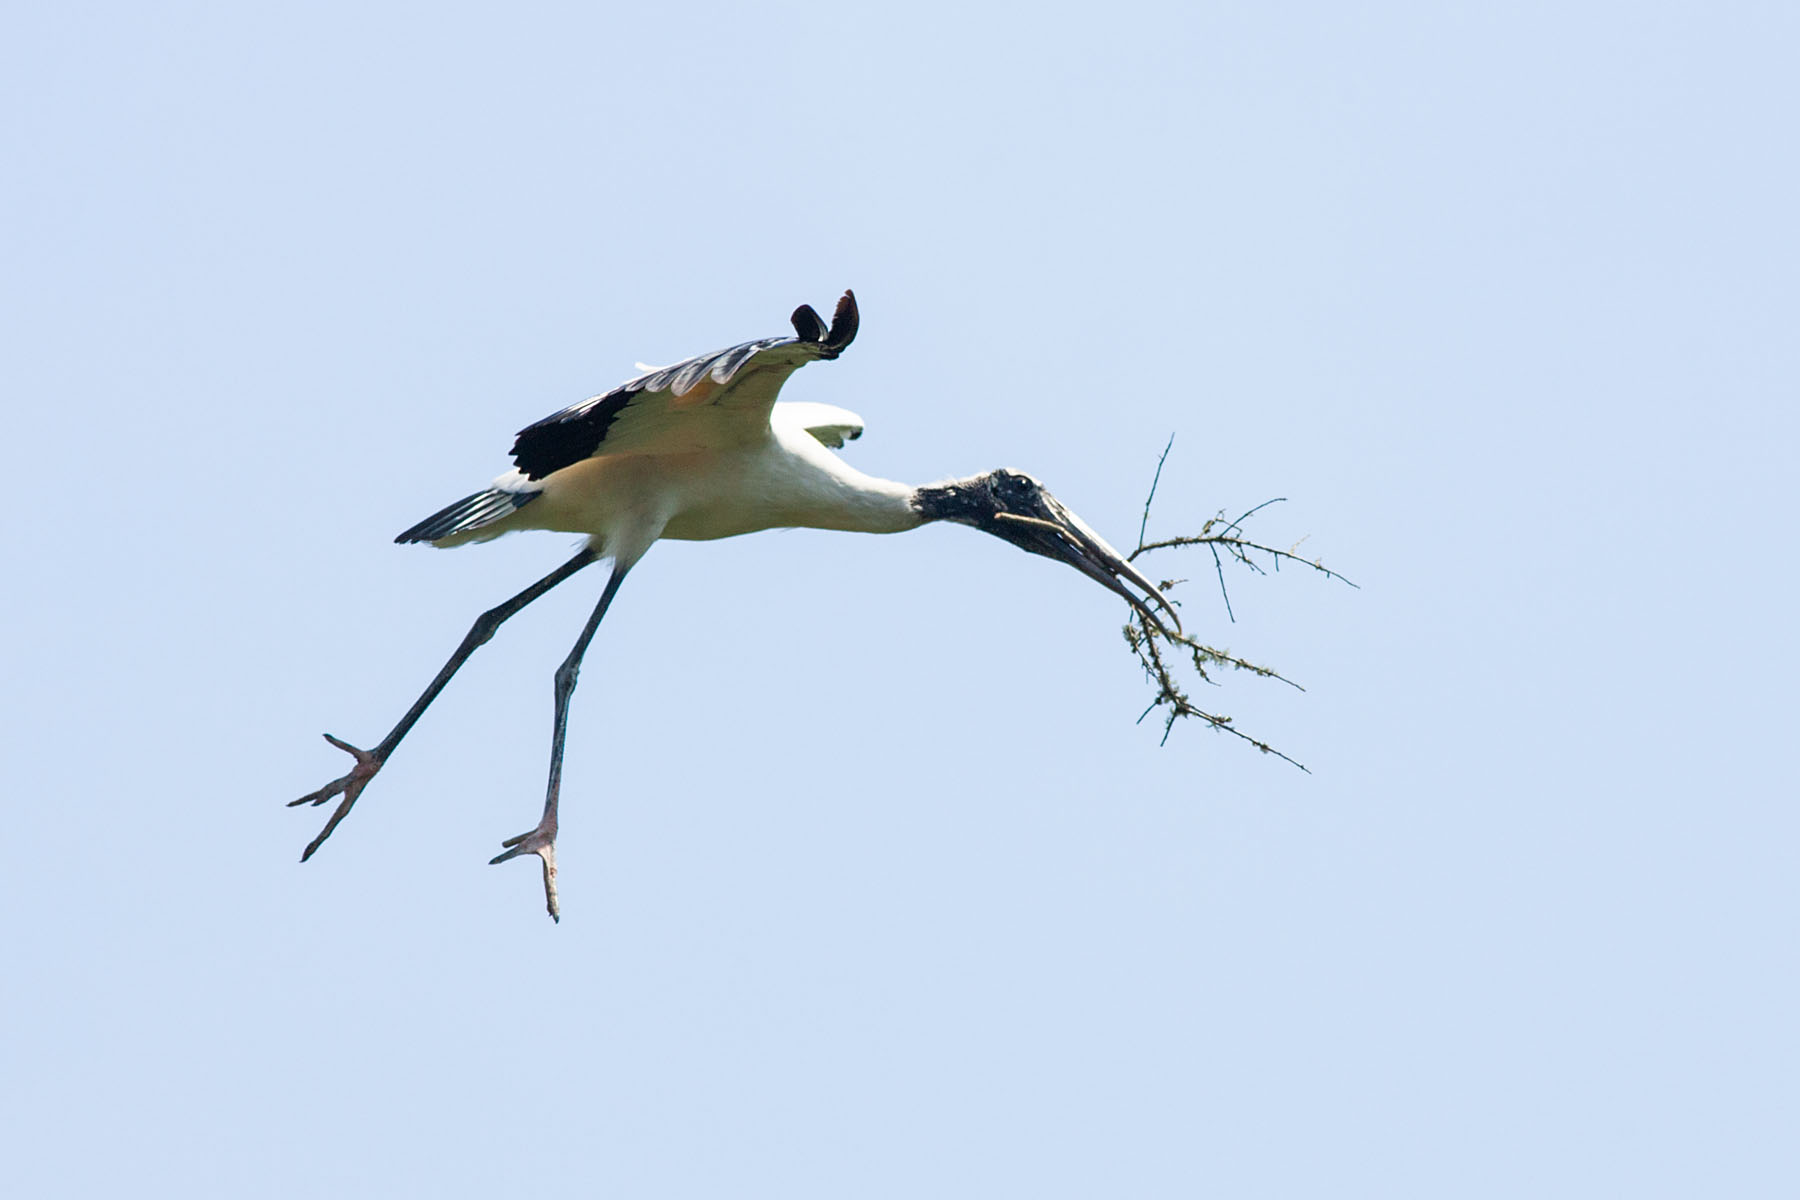 Wood Stork carrying nesting material, St. Augustine Alligator Farm.  Click for next photo.